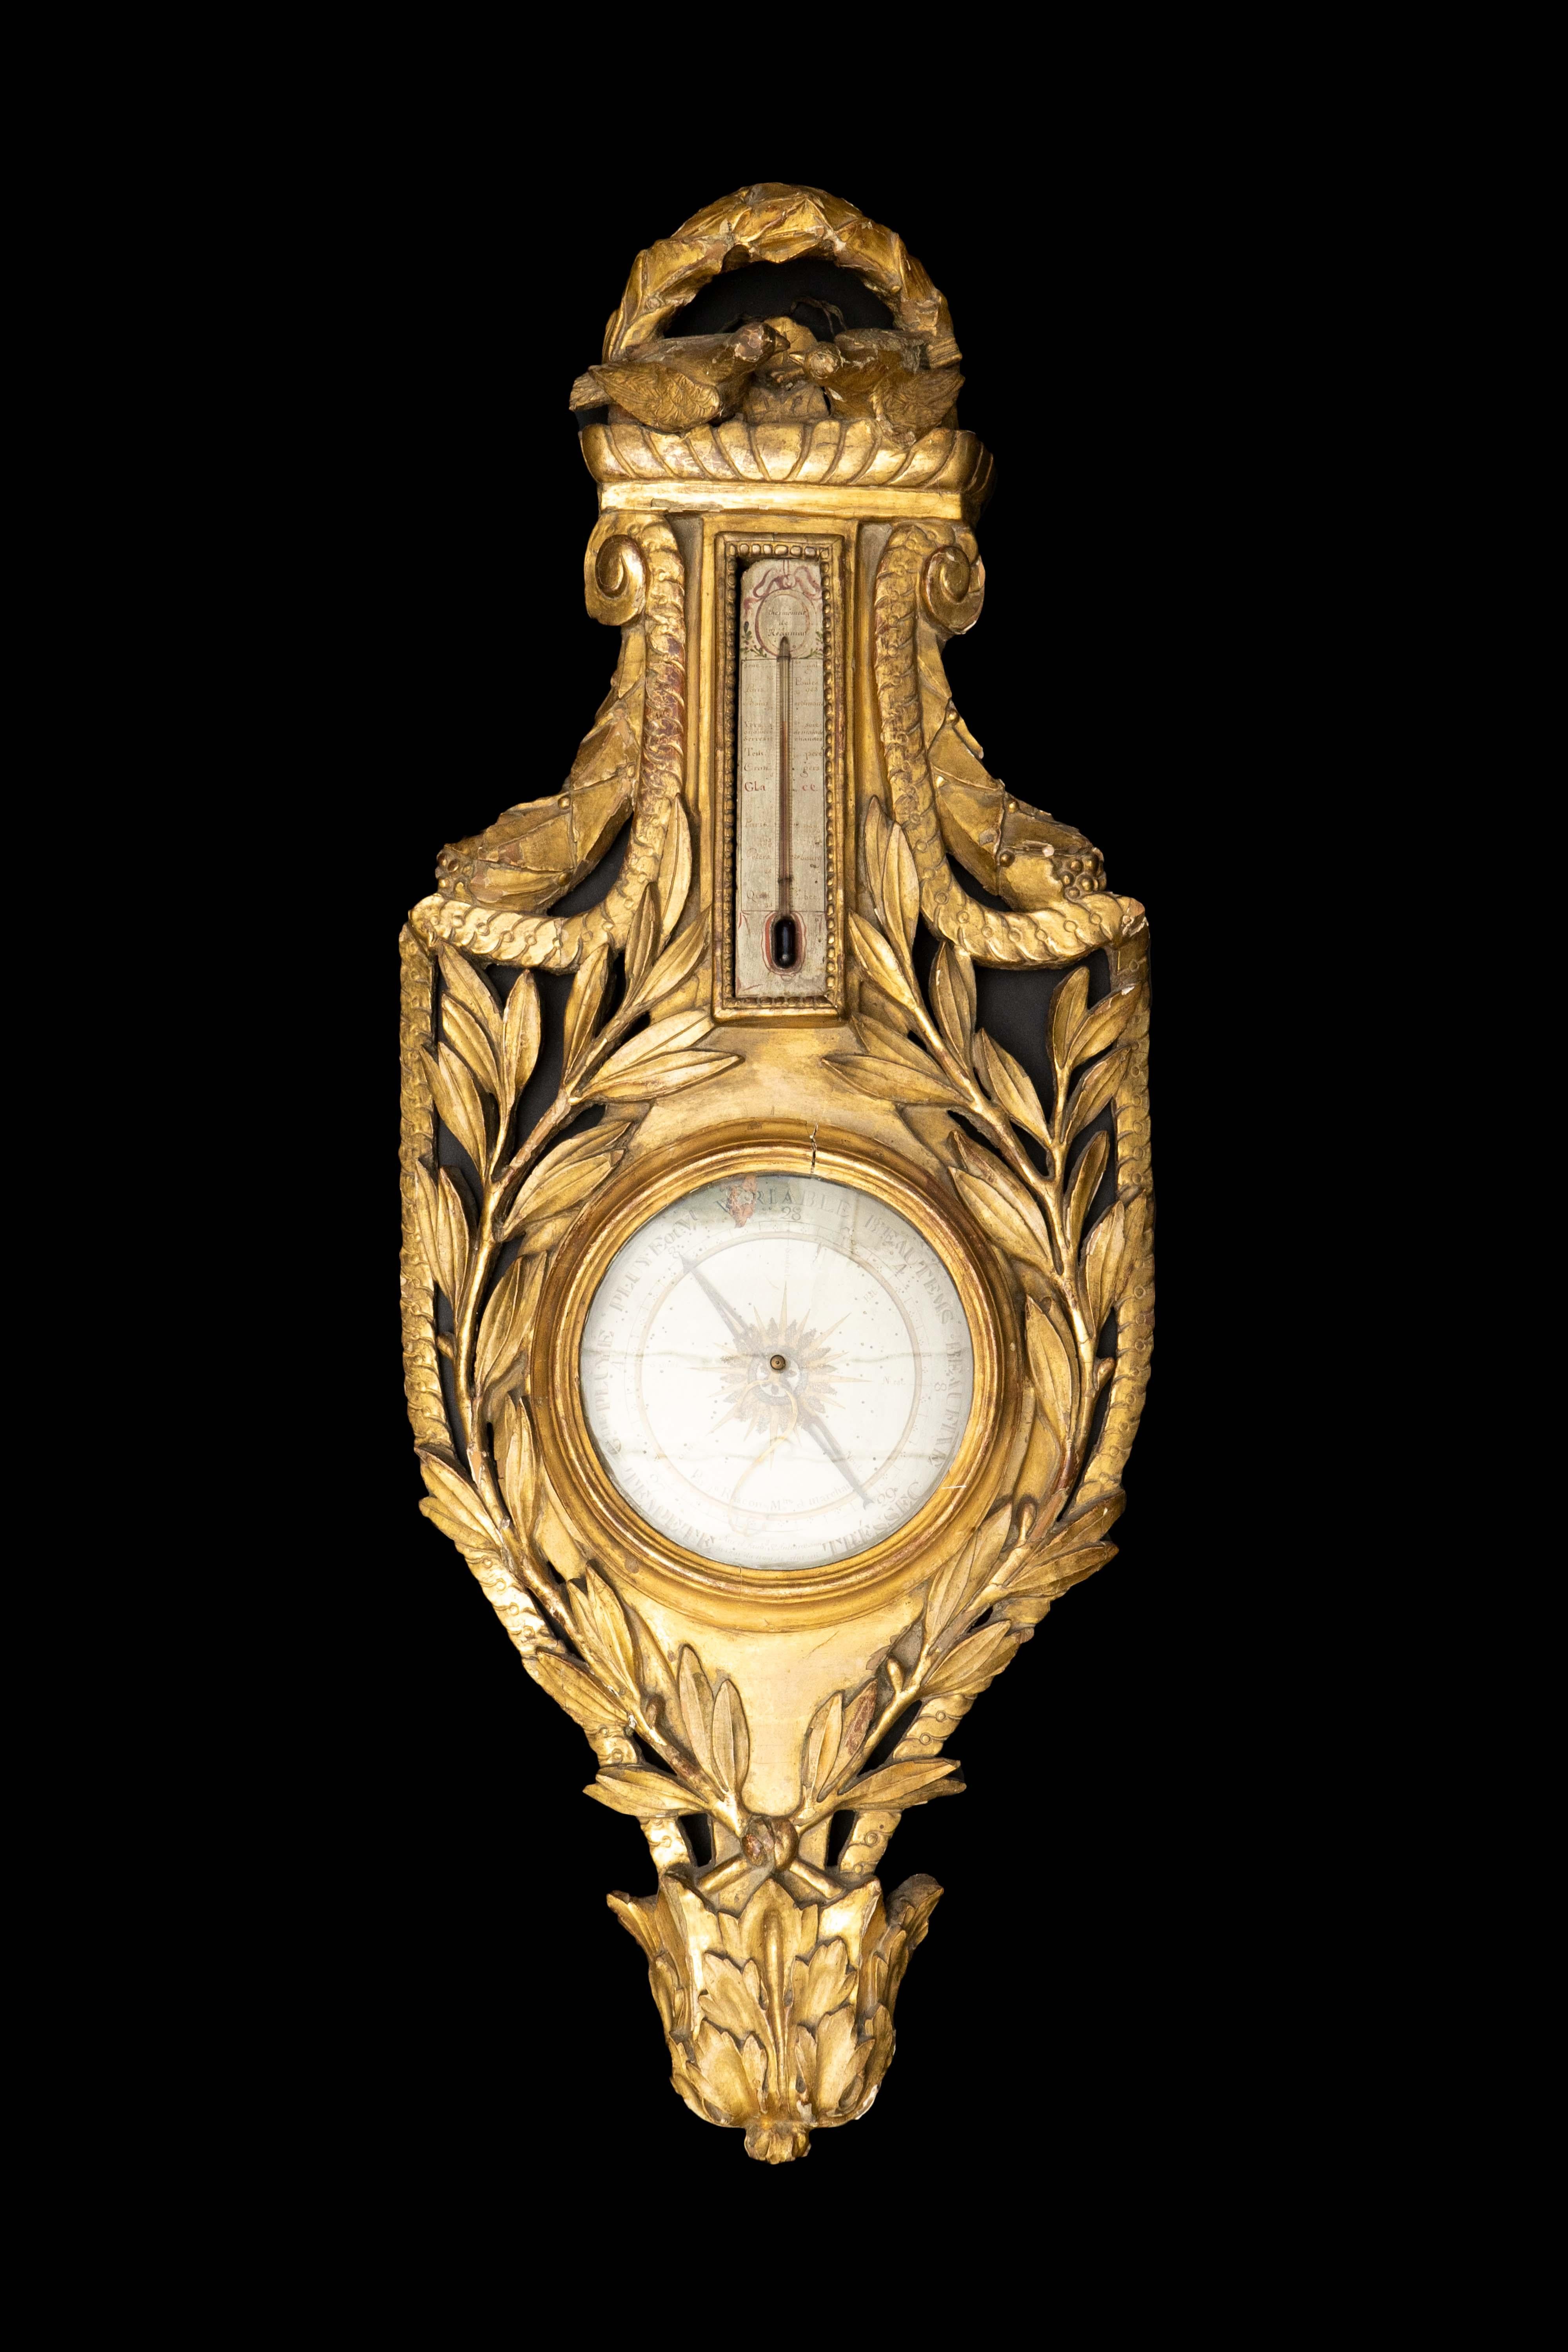 This beautiful 18th-century gilded barometer is a true masterpiece, signed on the dial by J. Ruscon. The exquisite craftsmanship is evident in every detail of this piece, from the intricate design to the high-quality materials used in its